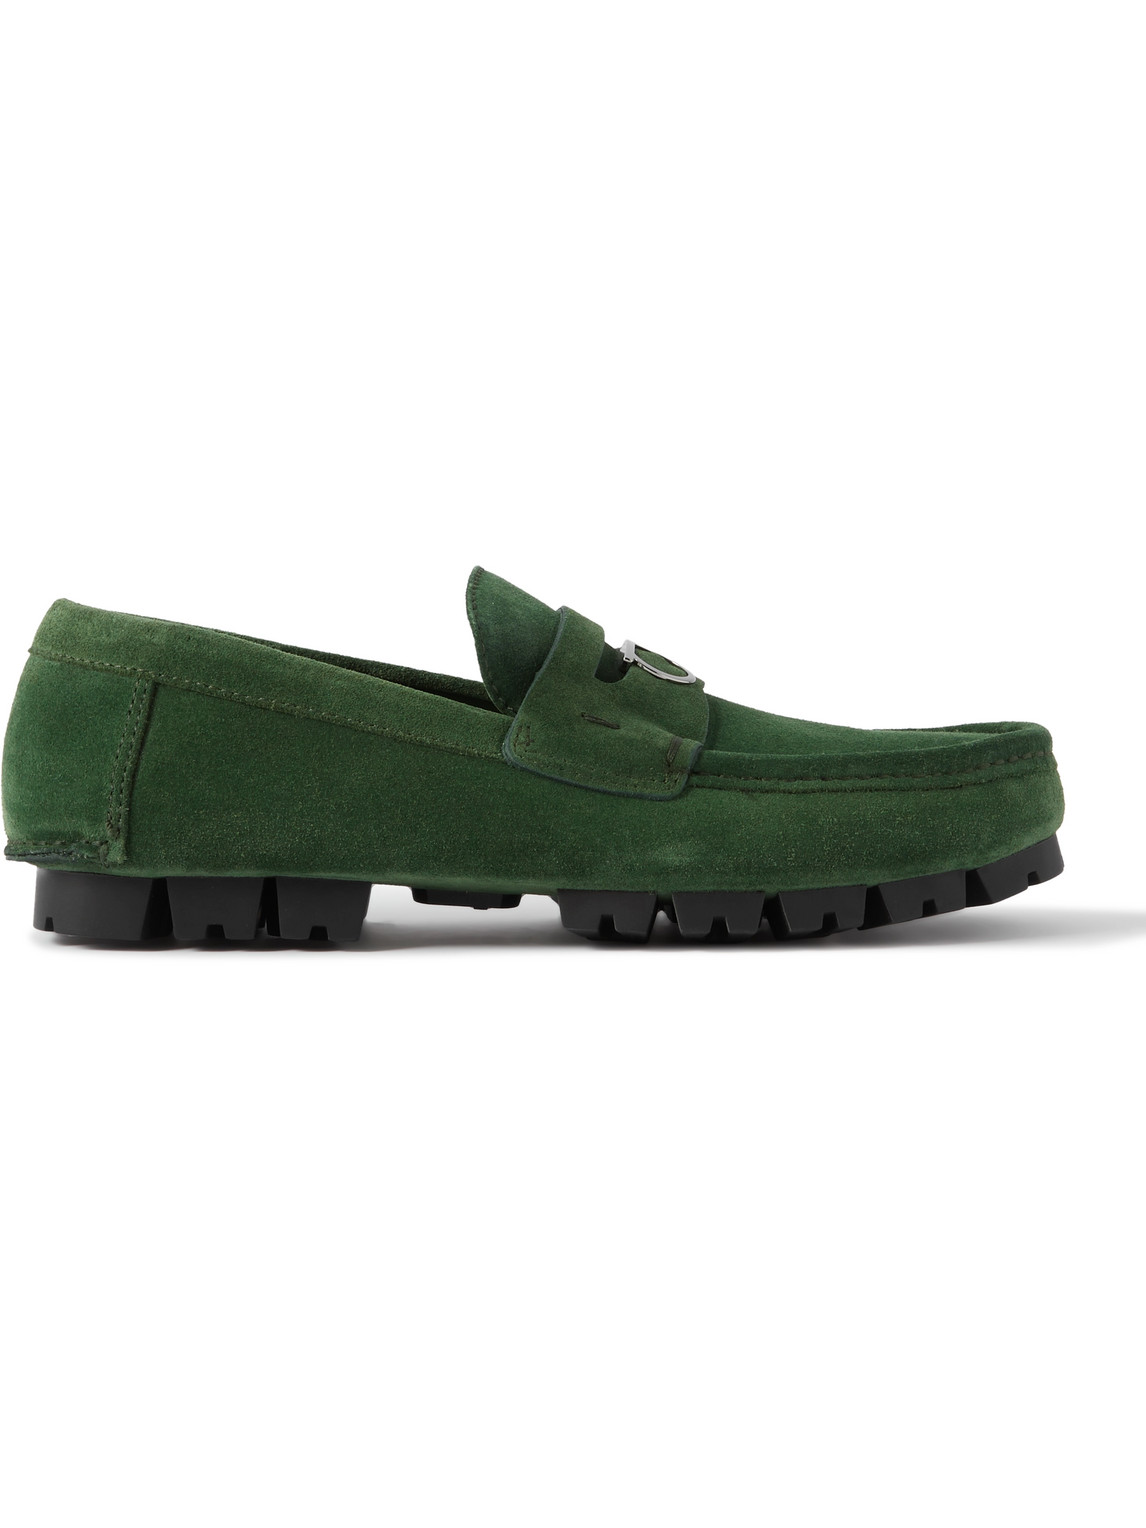 Ferragamo Embellished Suede Driving Shoes In Green